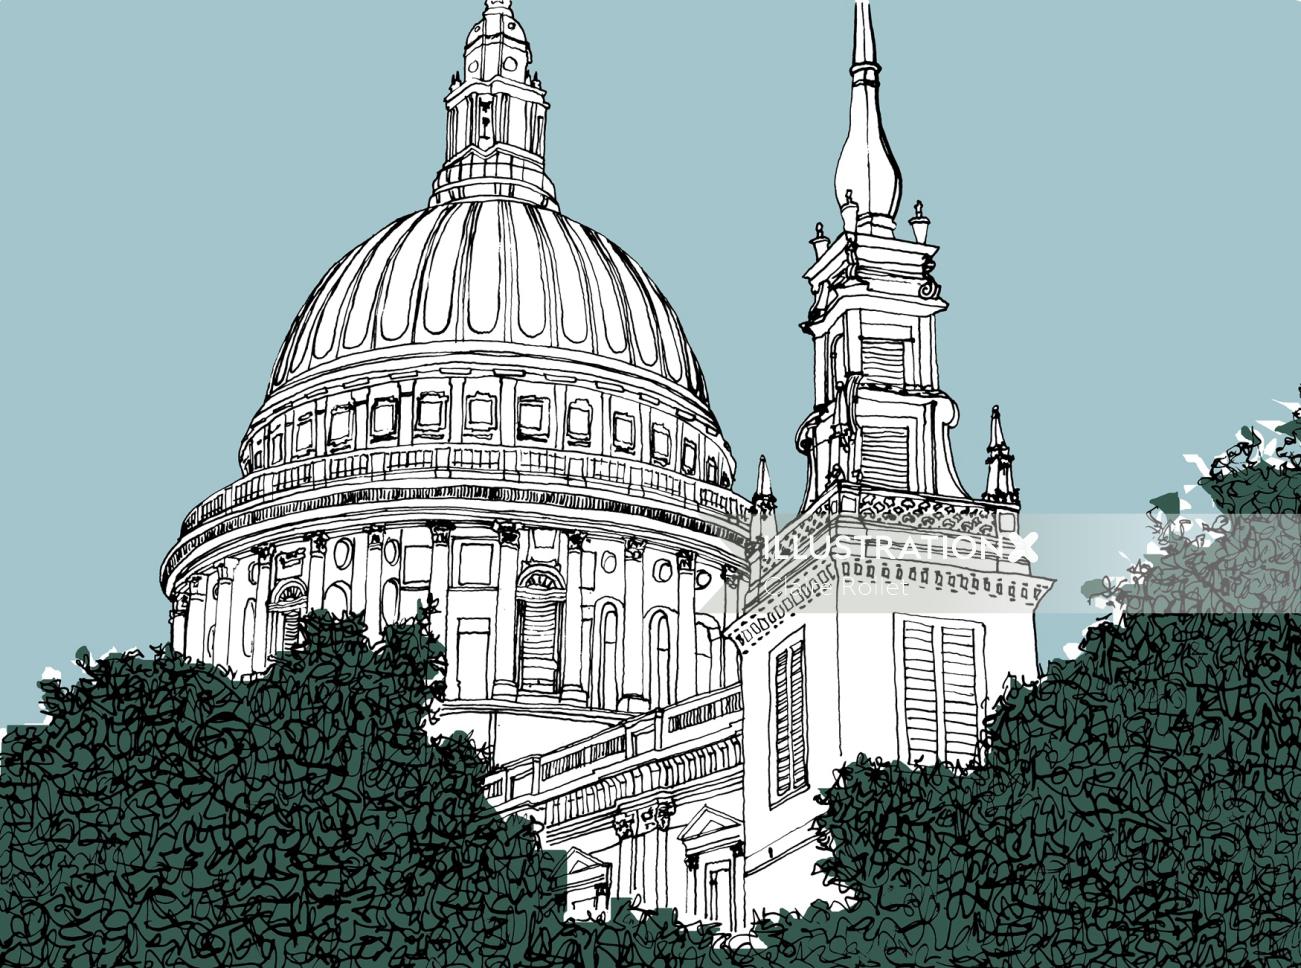 Iconic architecture of St Paul's Cathedral, London